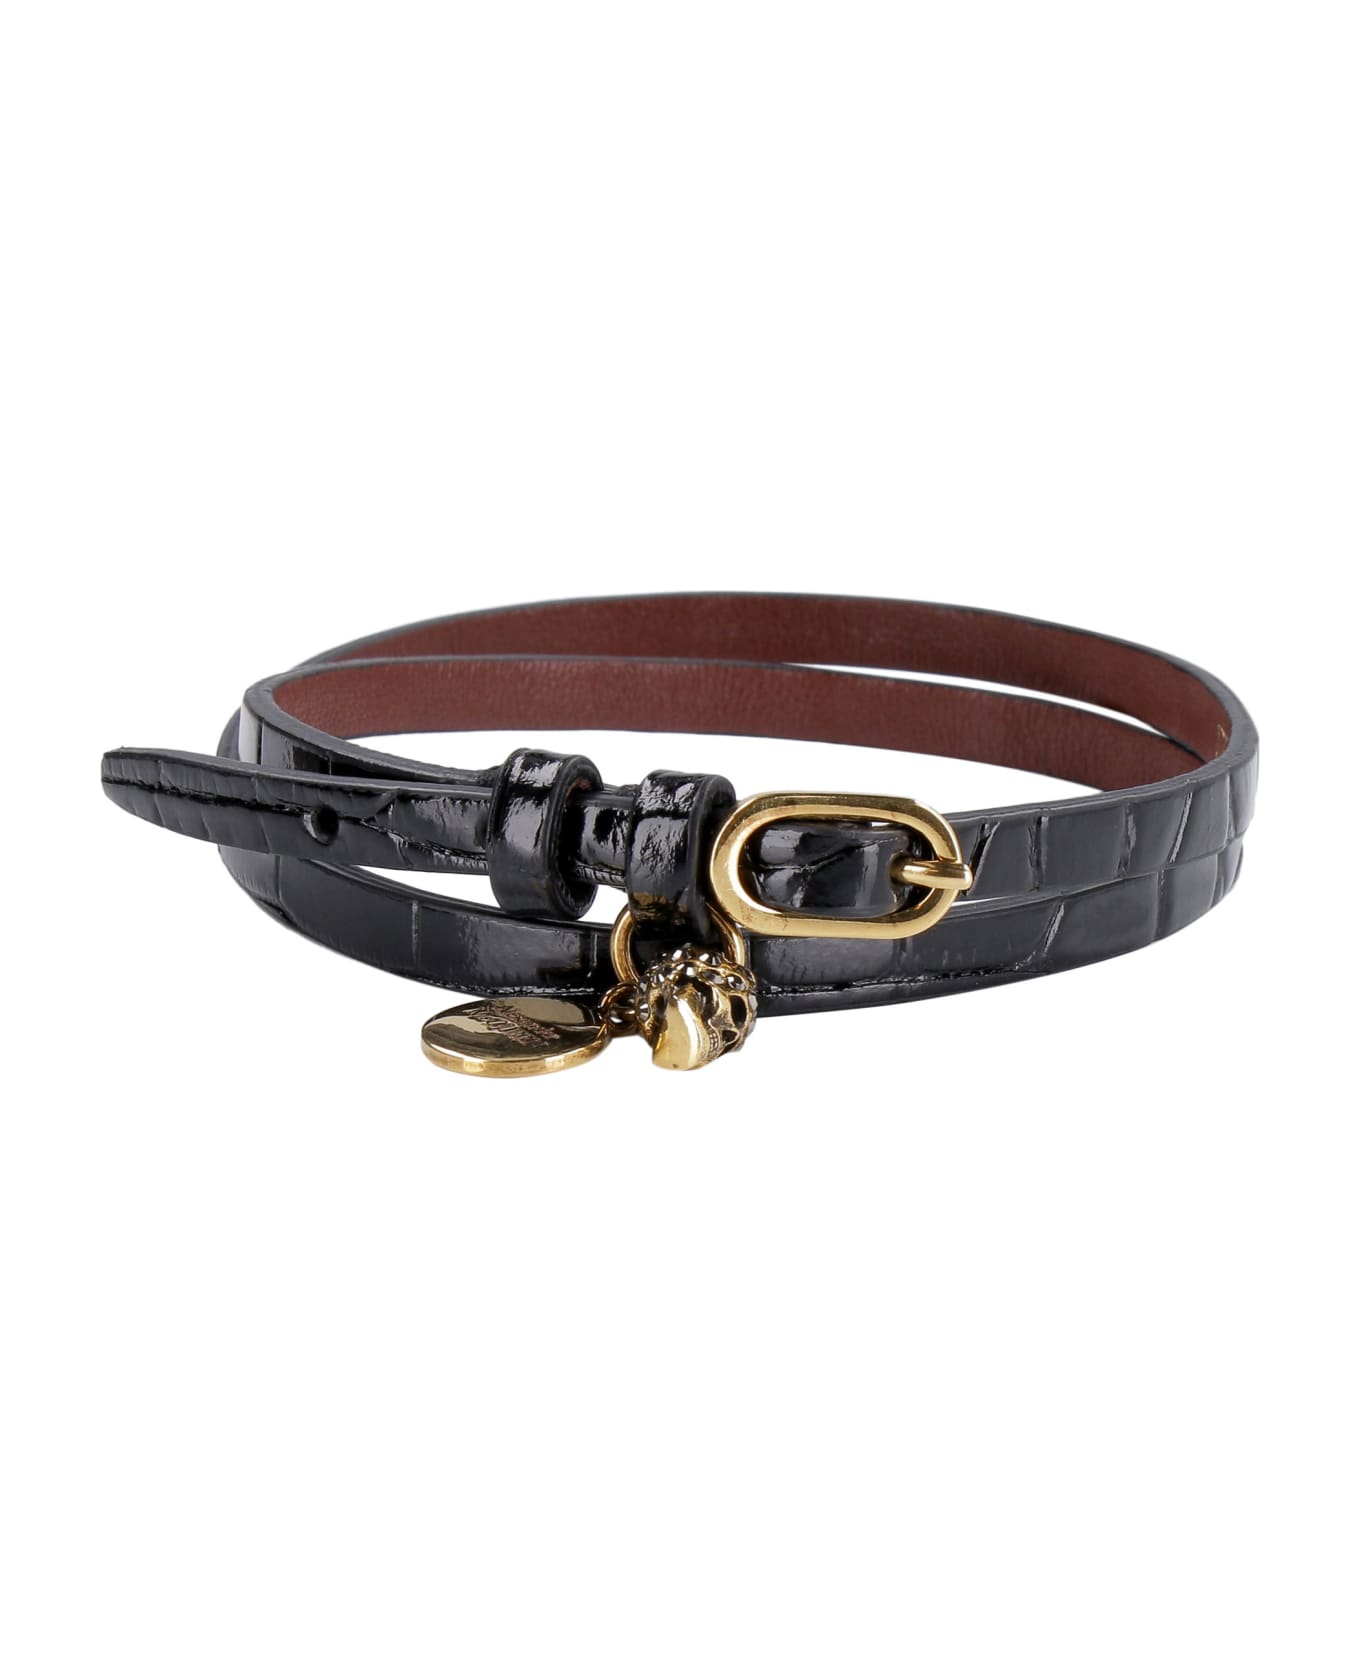 Alexander McQueen Leather Bracelet With Metal Logo Pendant And Skull